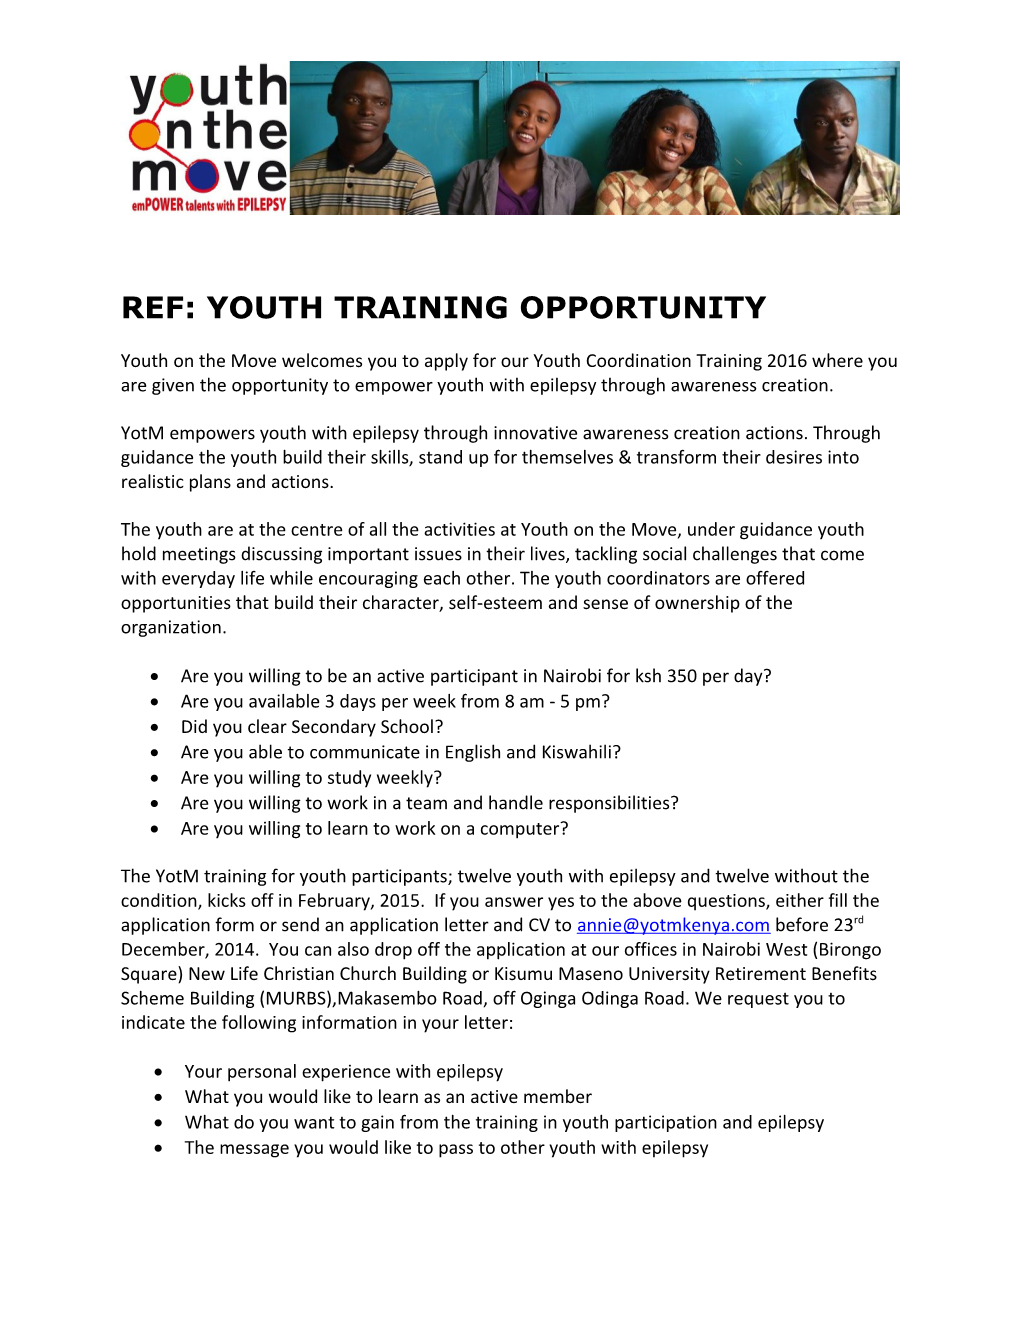 Ref: Youth Training Opportunity